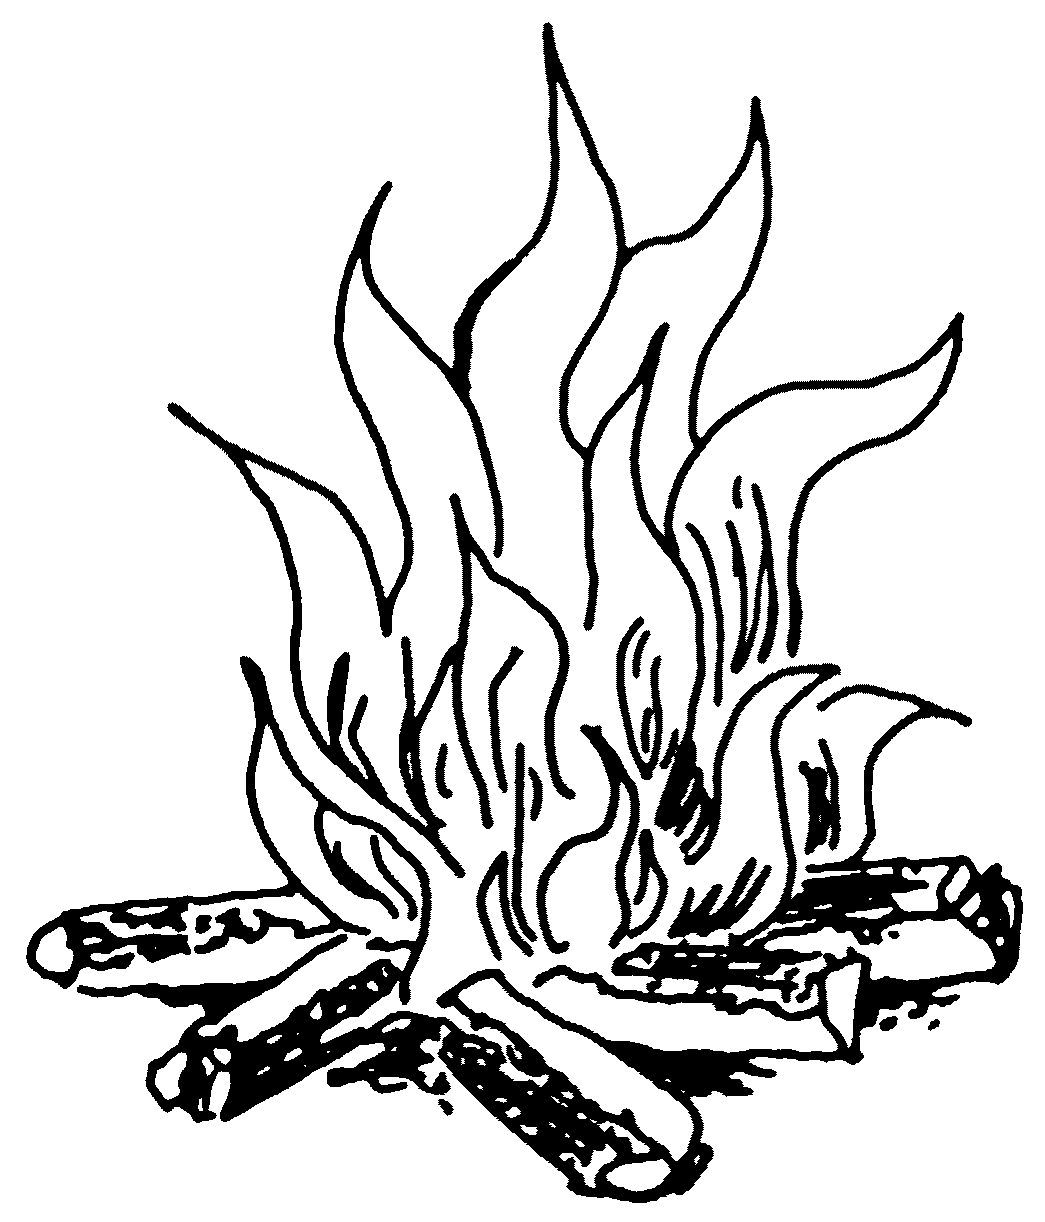 Fire Flames Image Coloring Page